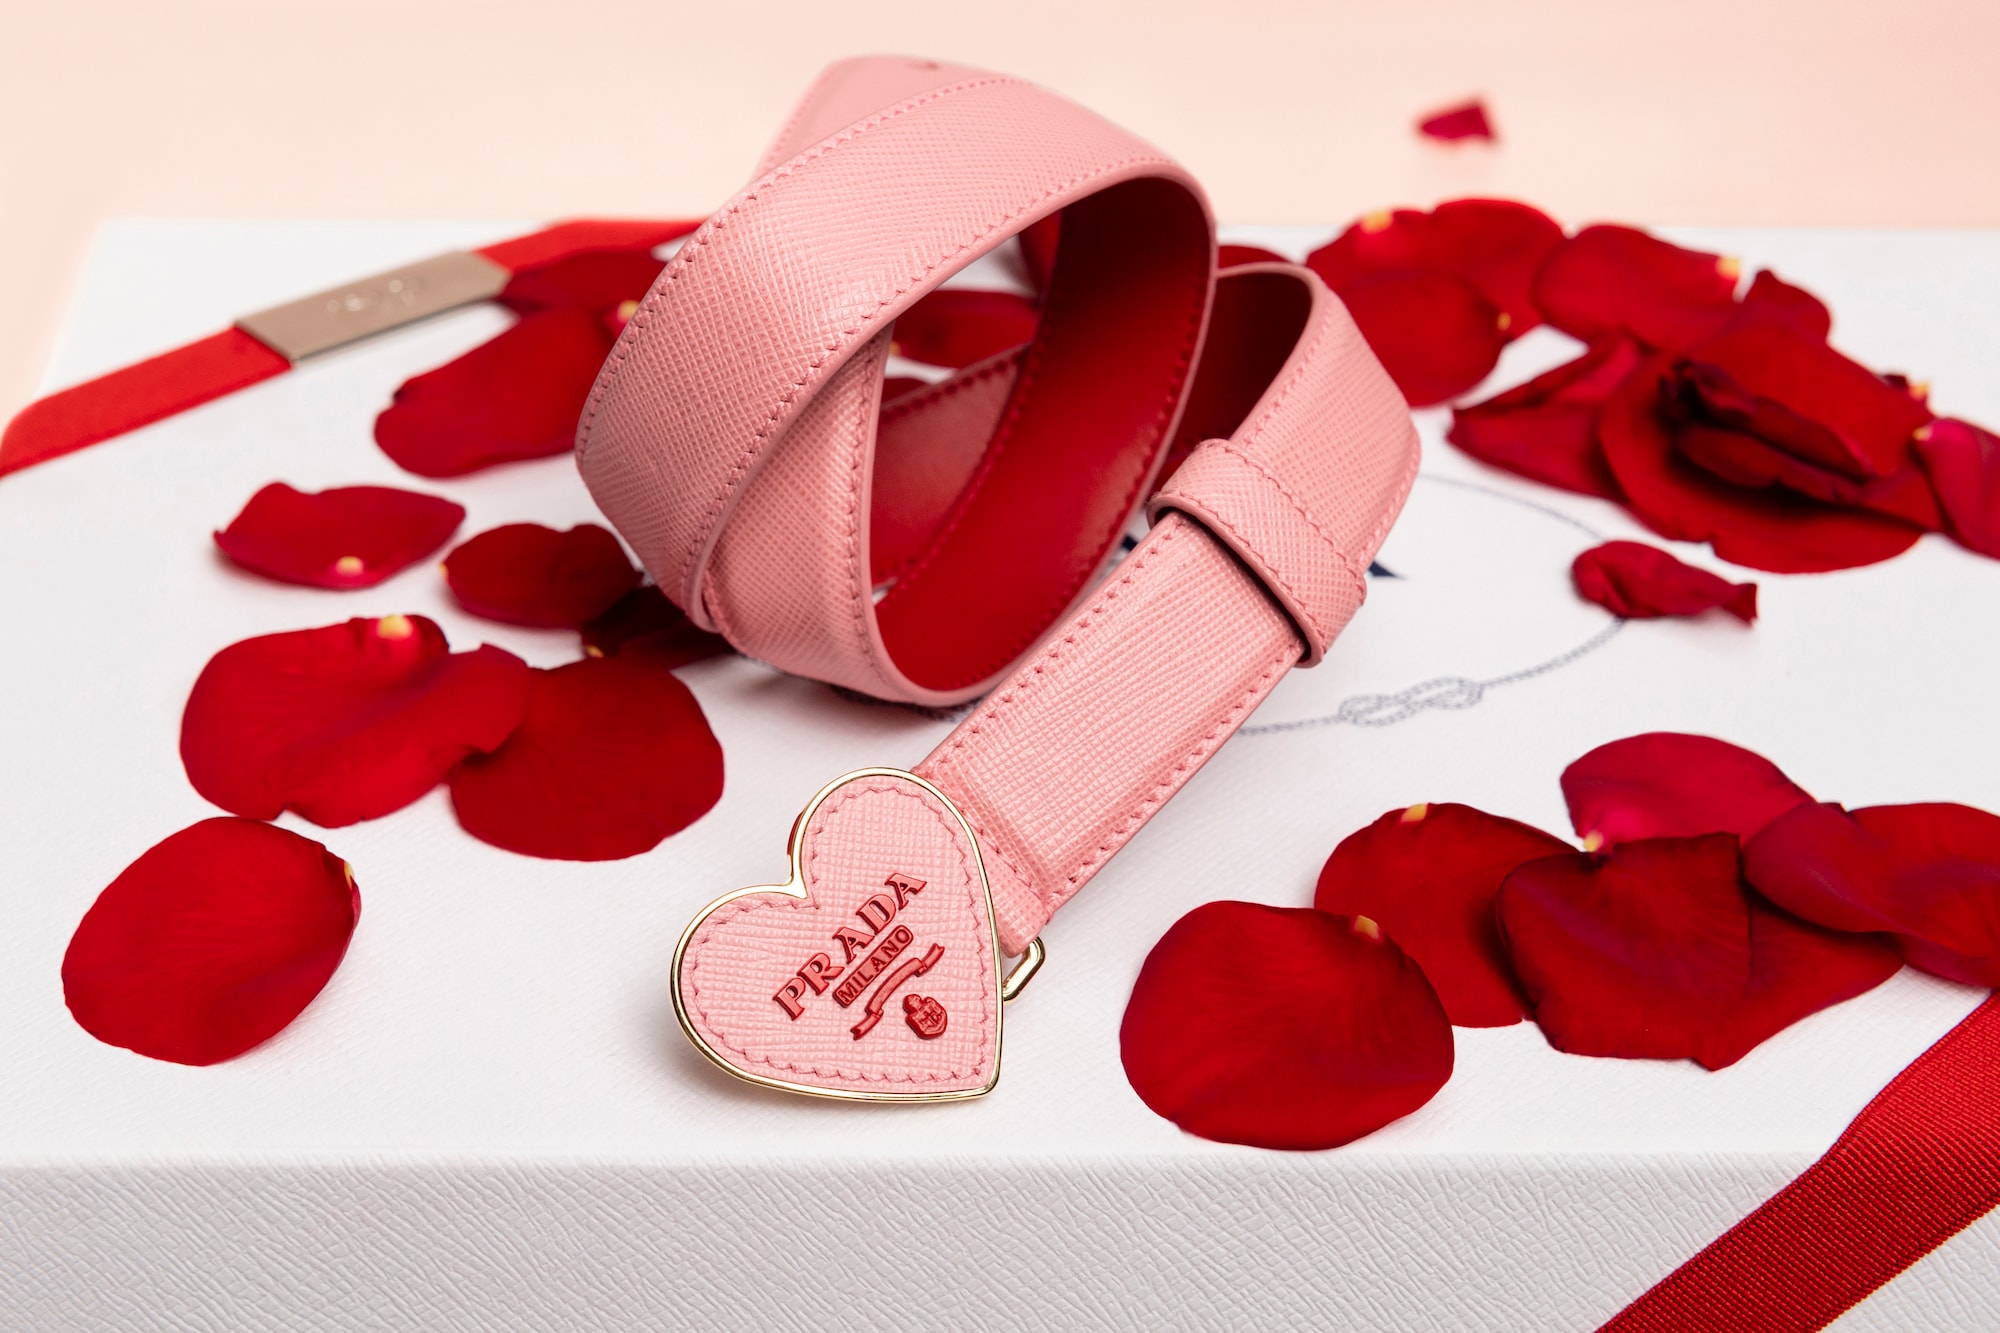 Prada Love Heart Bag and Accessories Collection